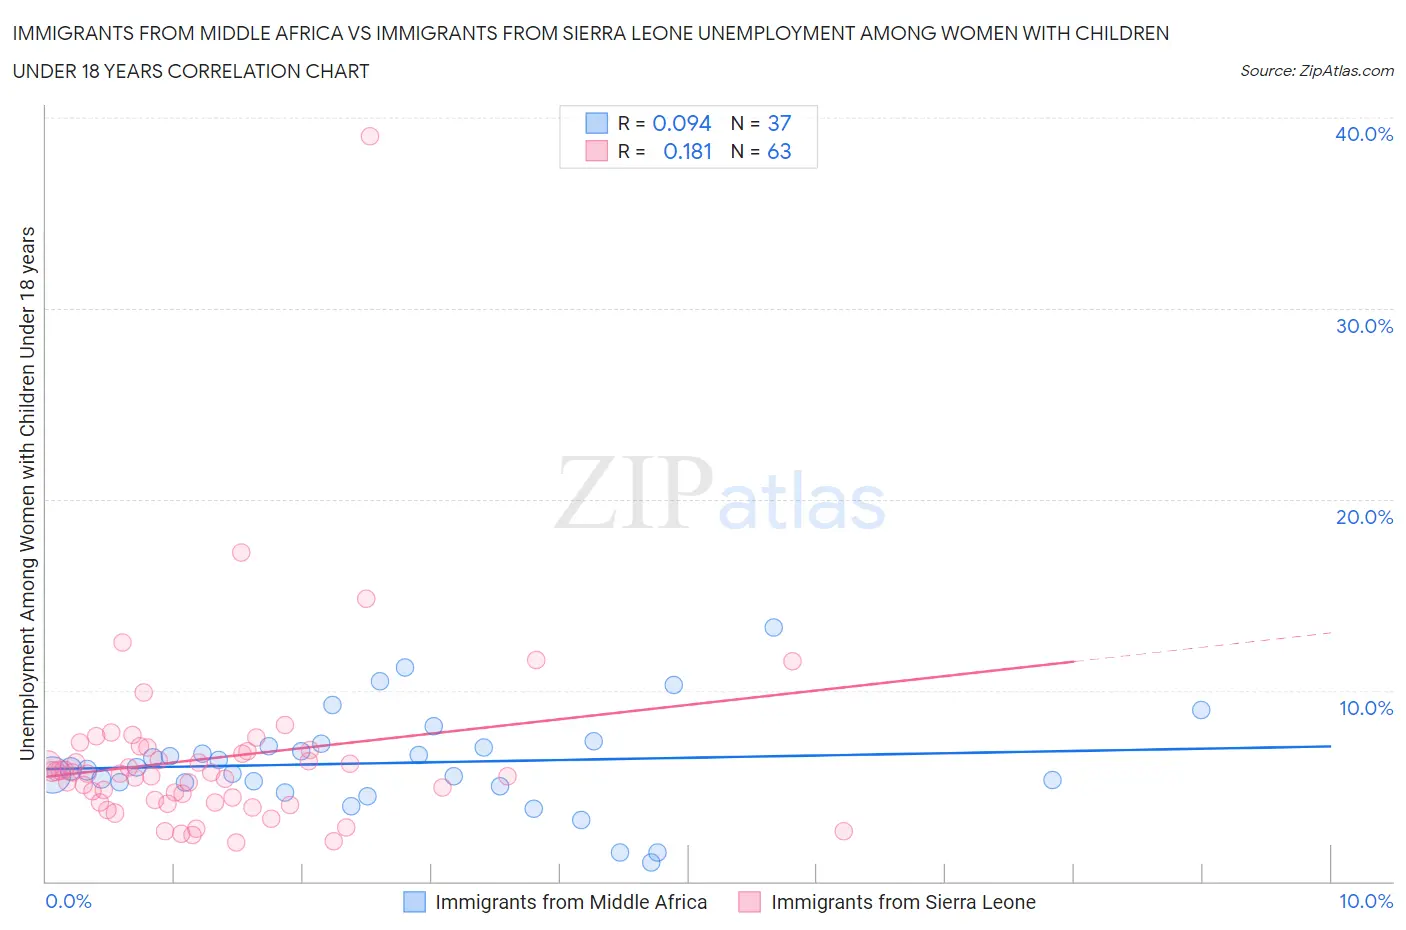 Immigrants from Middle Africa vs Immigrants from Sierra Leone Unemployment Among Women with Children Under 18 years